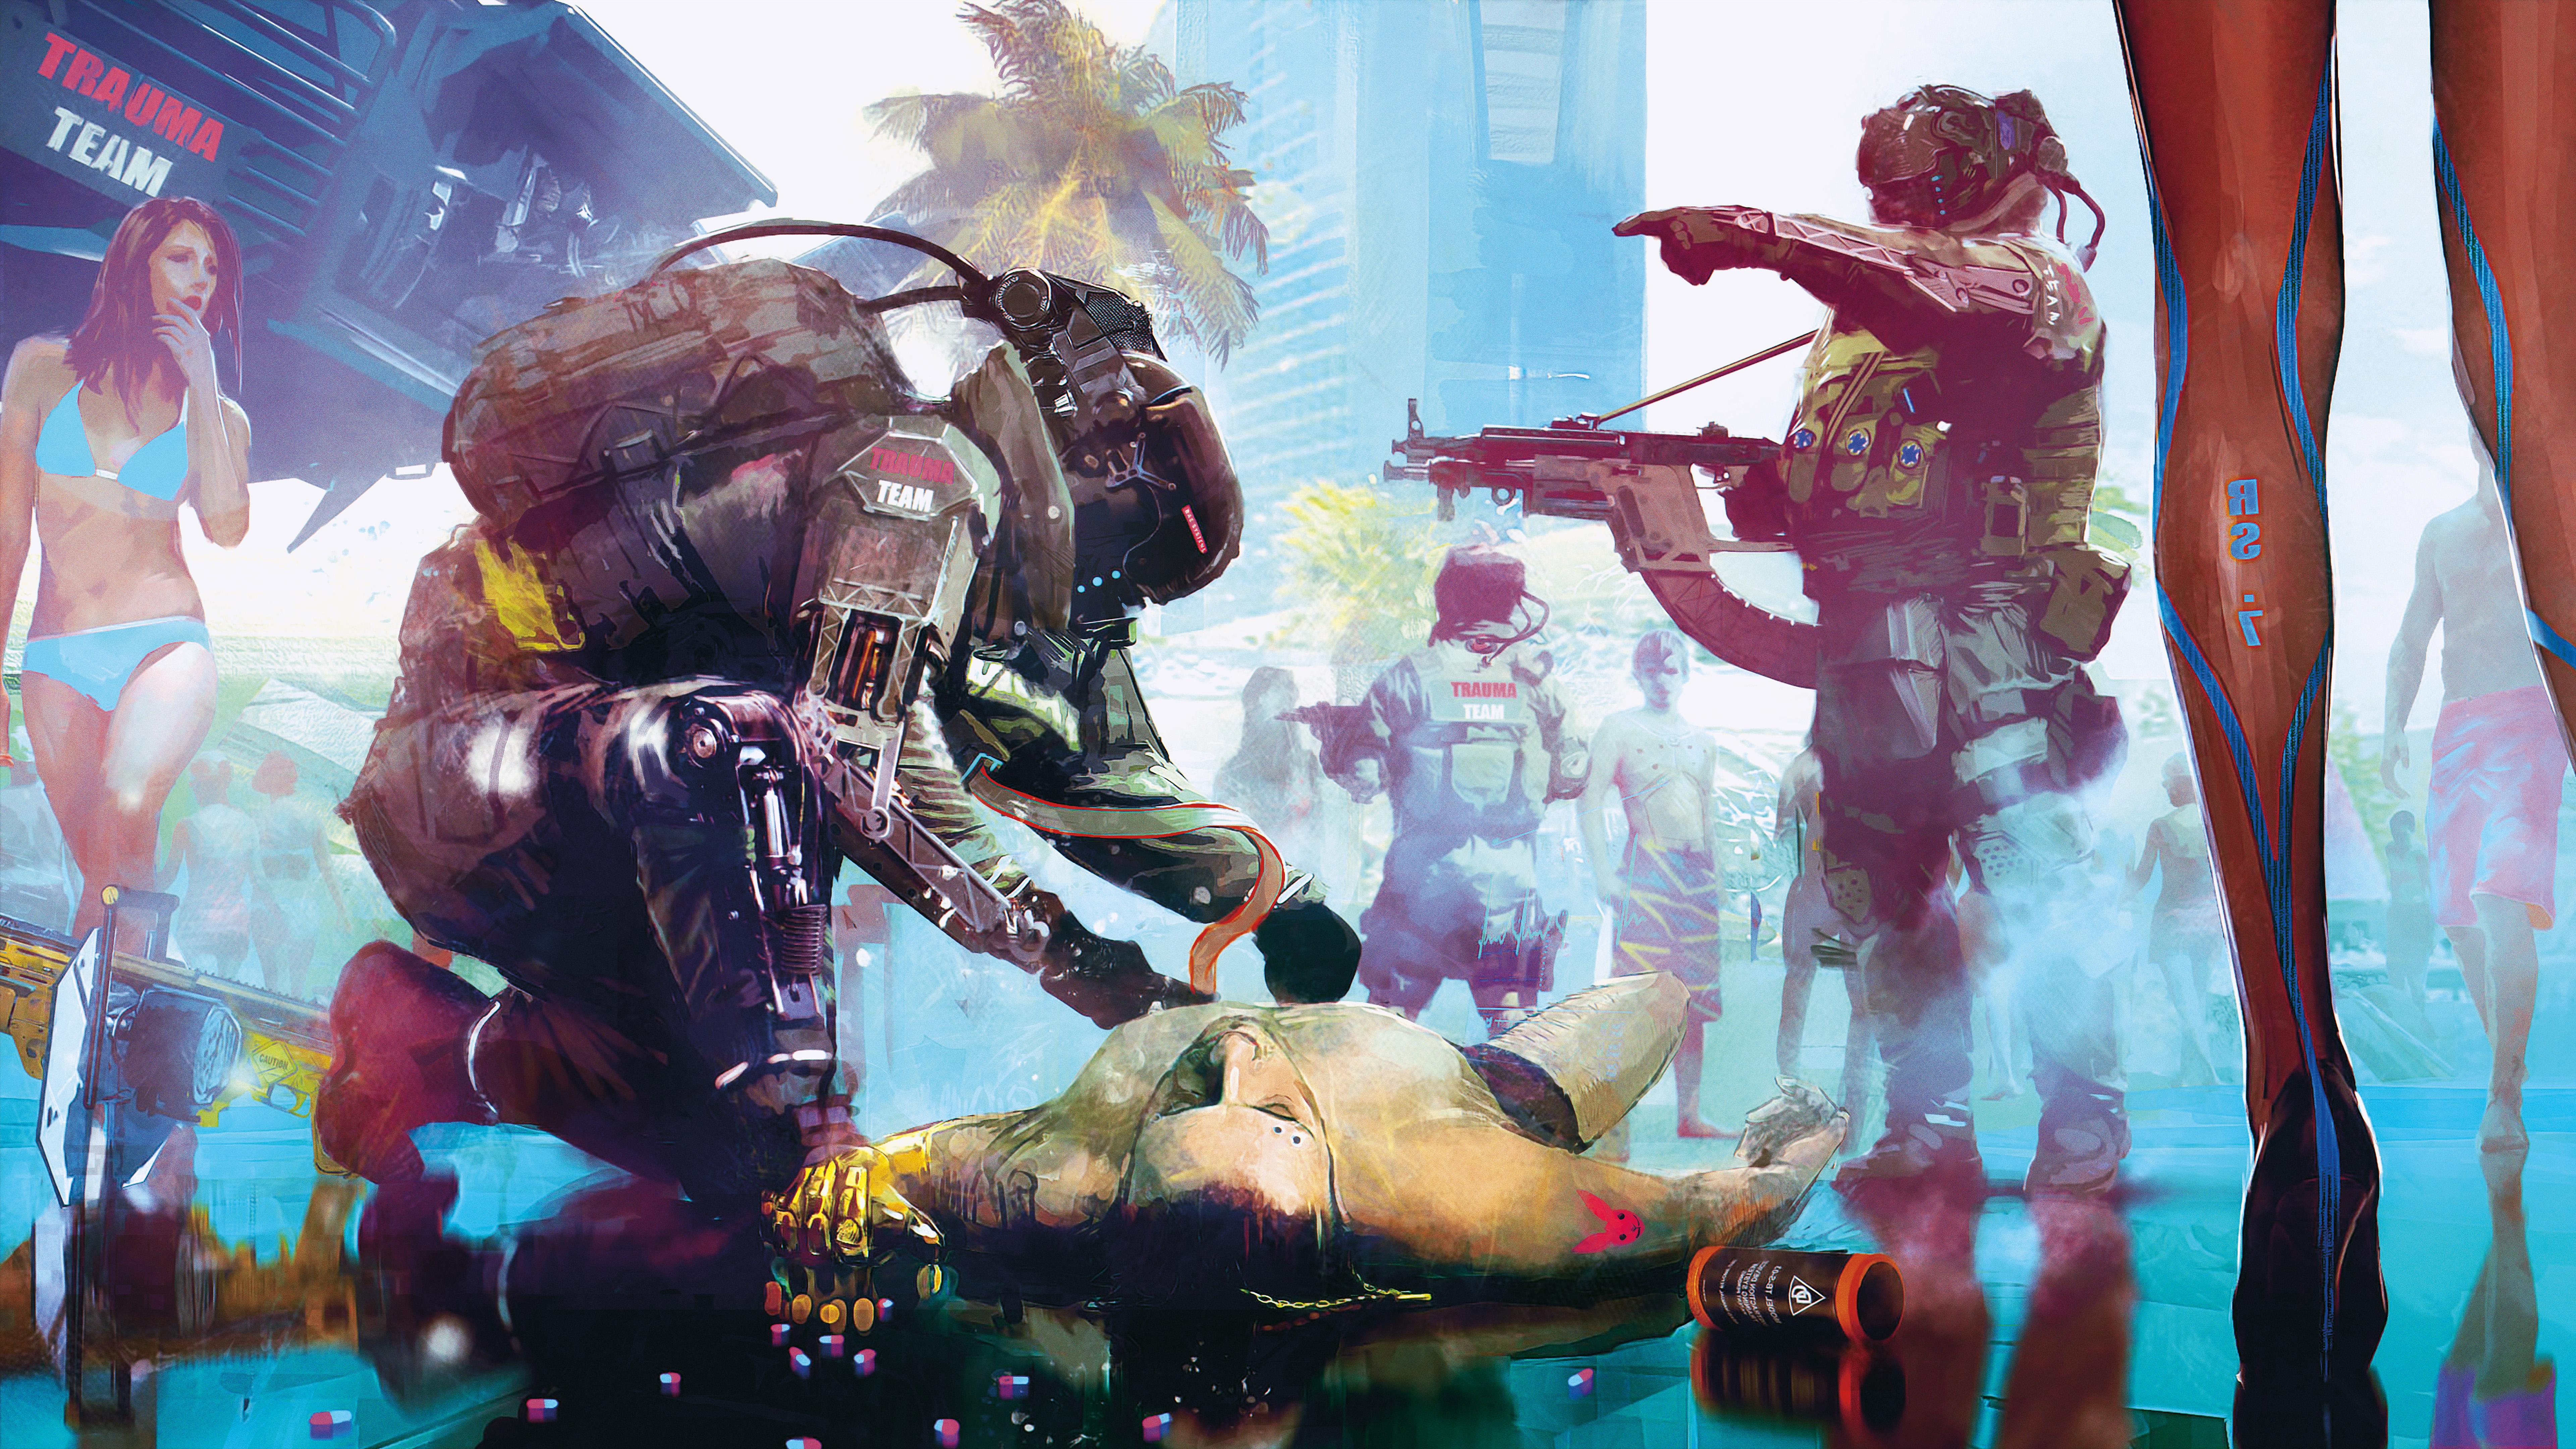 Wallpaper Cyberpunk Trauma Team, E3 4K, 8K, Games,. Wallpaper for iPhone, Android, Mobile and Desktop